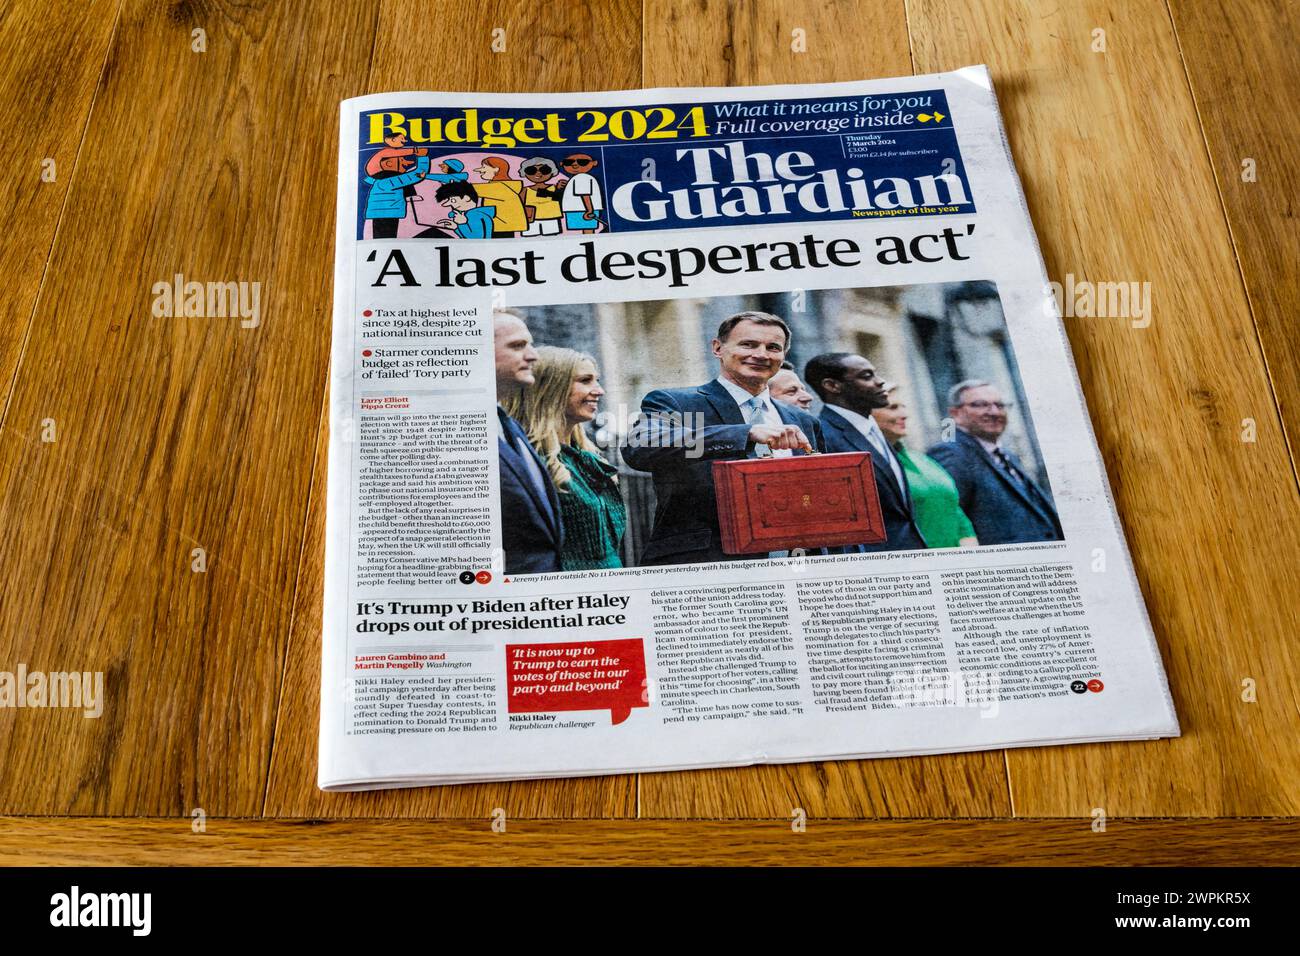 7 March 2024. The Guardian headline after budget reads: 'A last desperate act'.  Quoting Labour leader Keir Starmer's description of the budget. Stock Photo